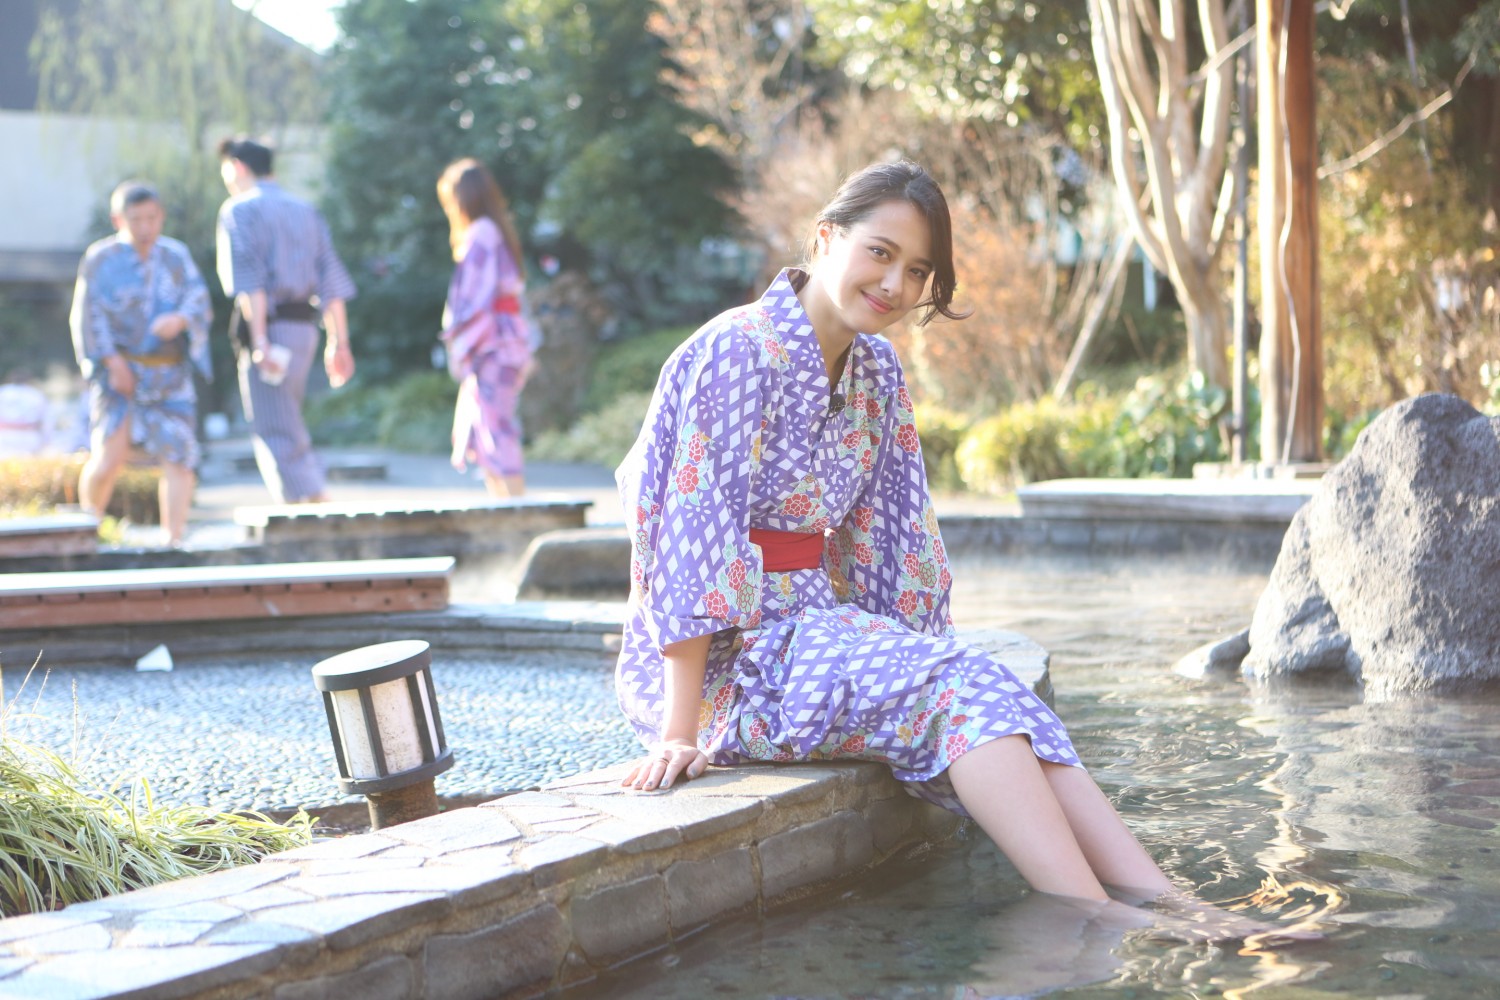 Experience Bathing in Real Hot Springs in Tokyo! Make Your Day a Perfect one by Spending at “Ooedo Onsen Monogatari”?